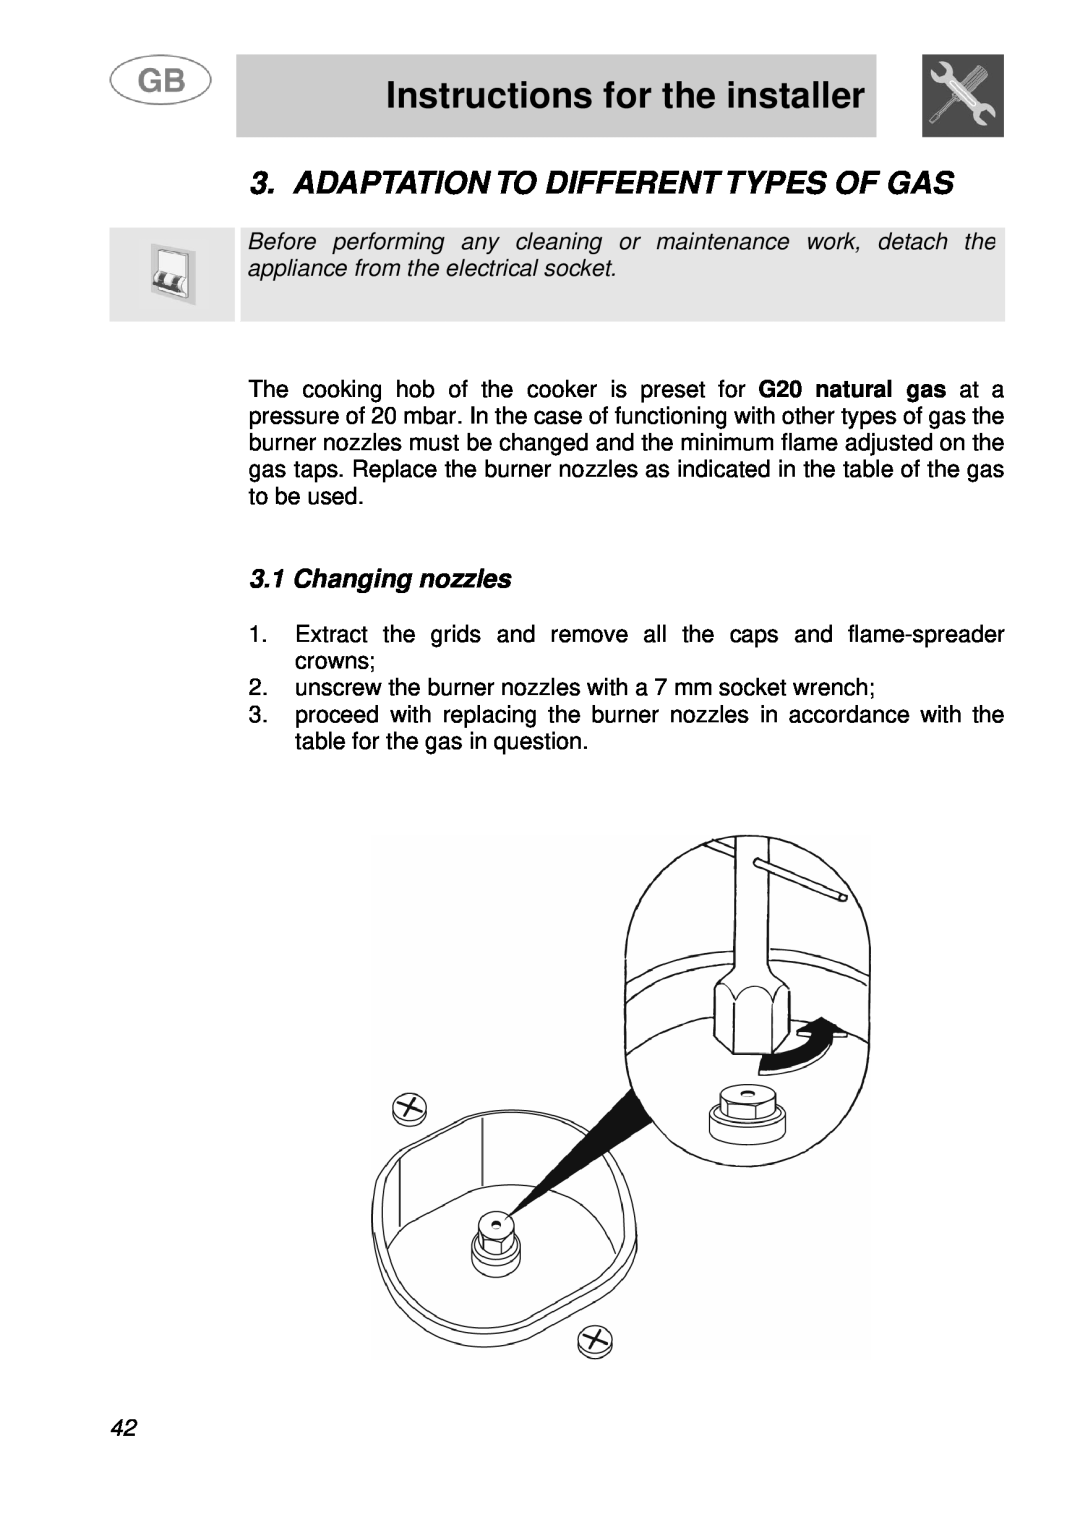 Smeg A41A manual Adaptation To Different Types Of Gas, Changing nozzles, Instructions for the installer 